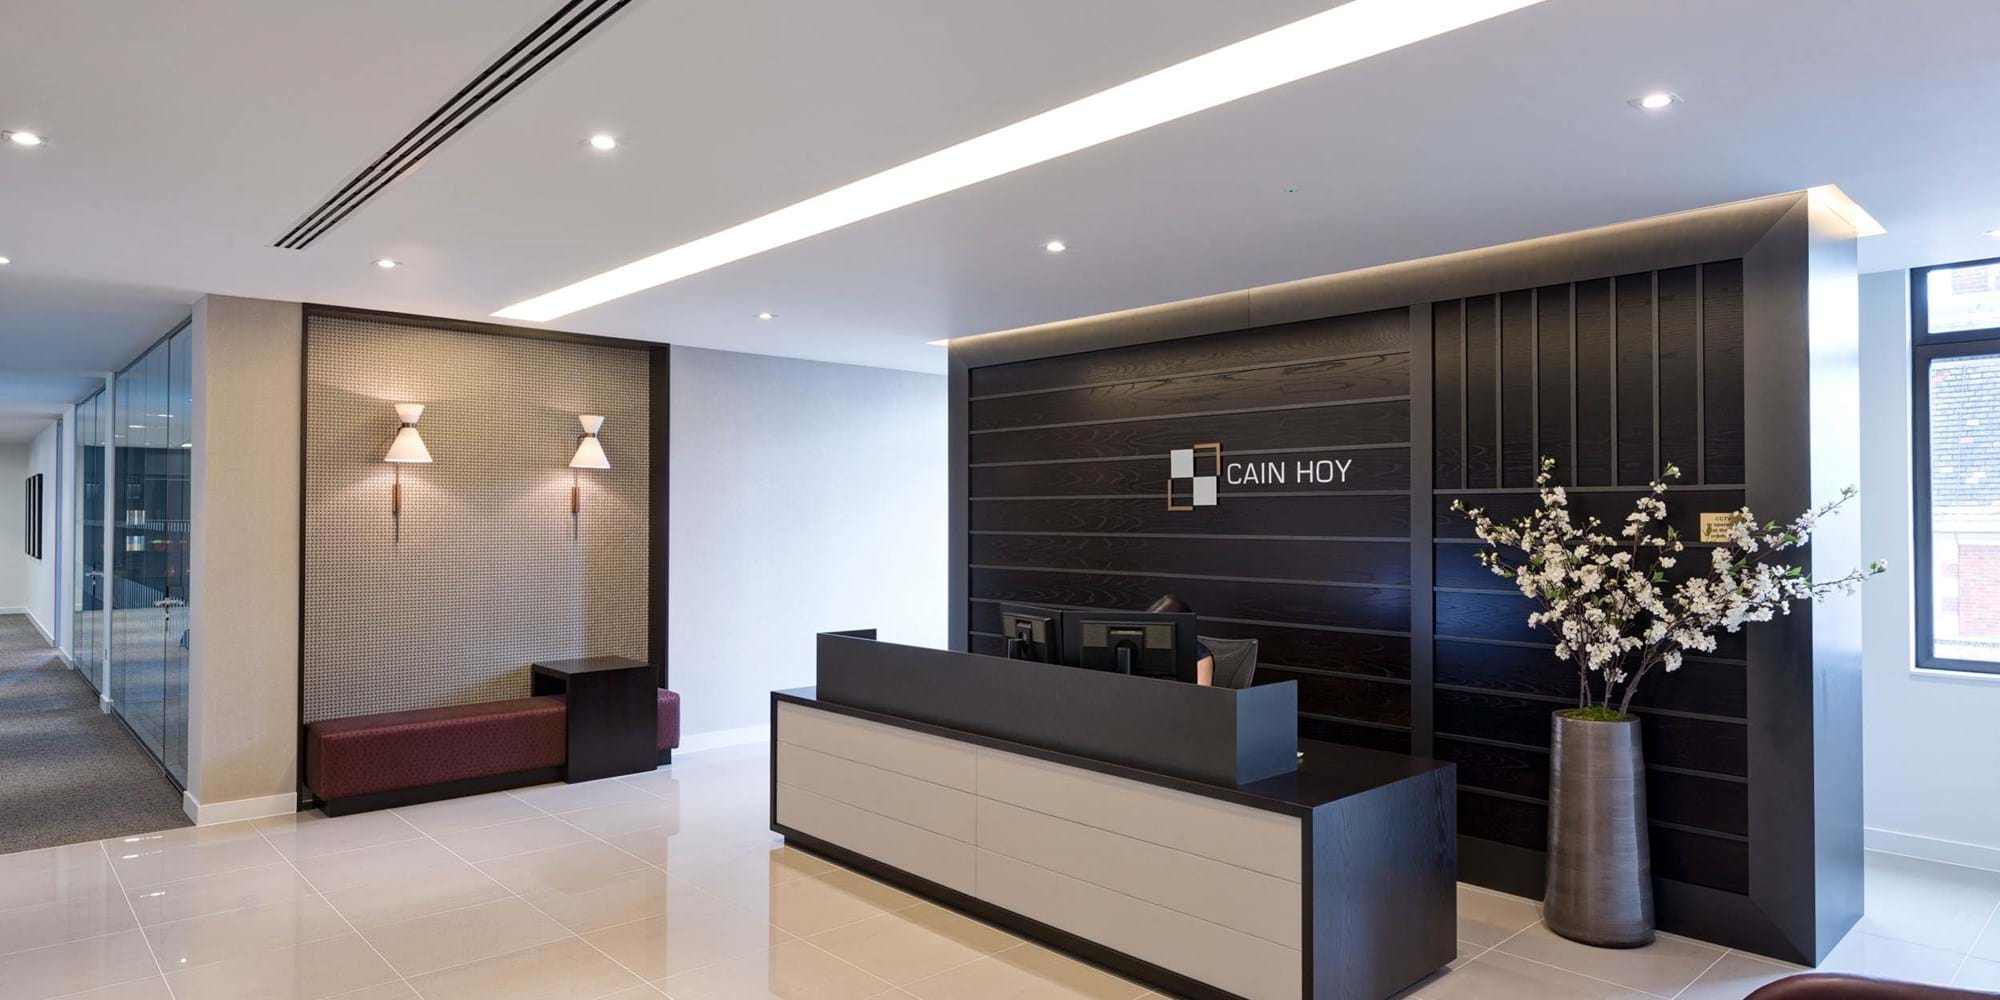 Modus Workspace office design, fit out and refurbishment - Cain Hoy - Reception - Cain Hoy 01 web site.jpg